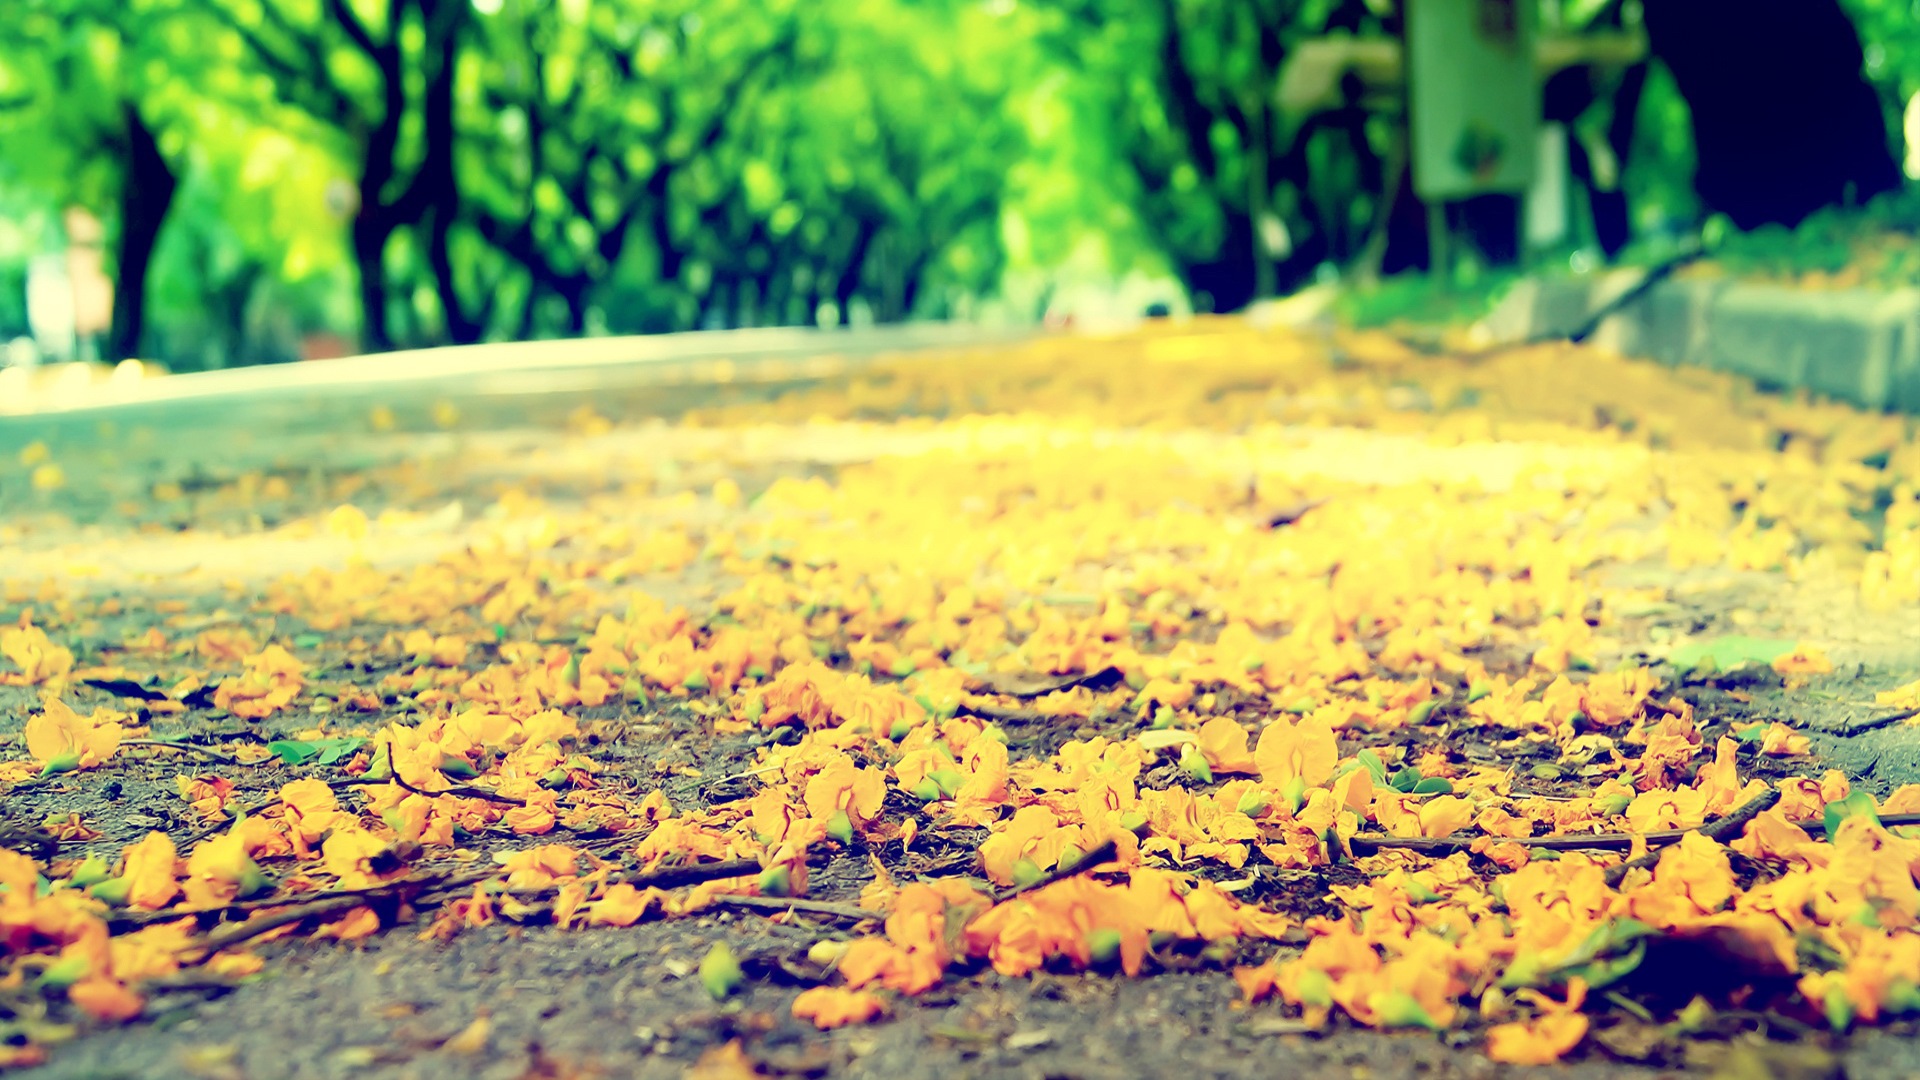 Flowers fall on ground, beautiful HD wallpapers #3 - 1920x1080